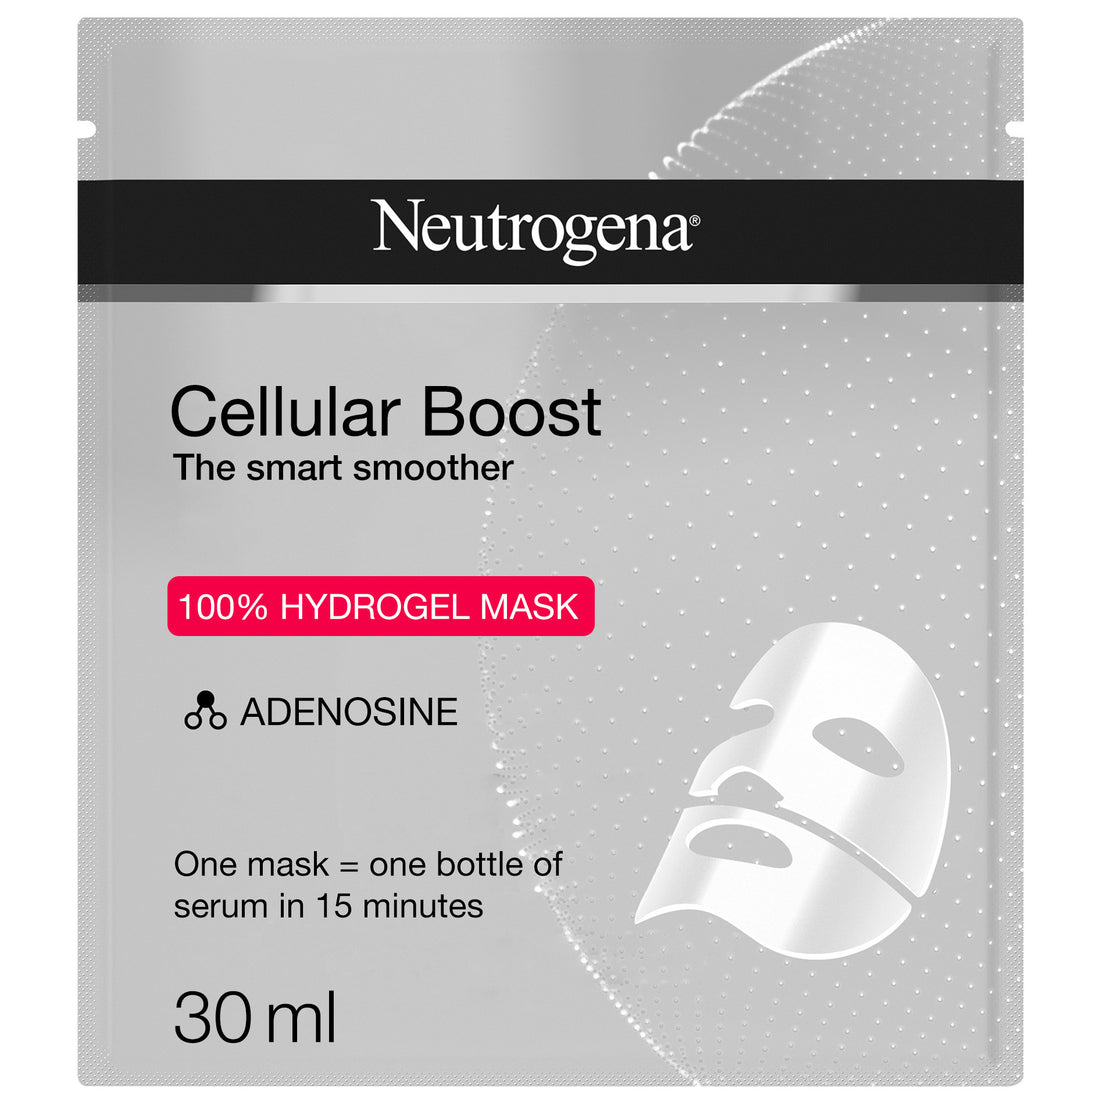 Neutrogena Face Mask Sheet, Cellular Boost, The Smart Smoother, 30ml